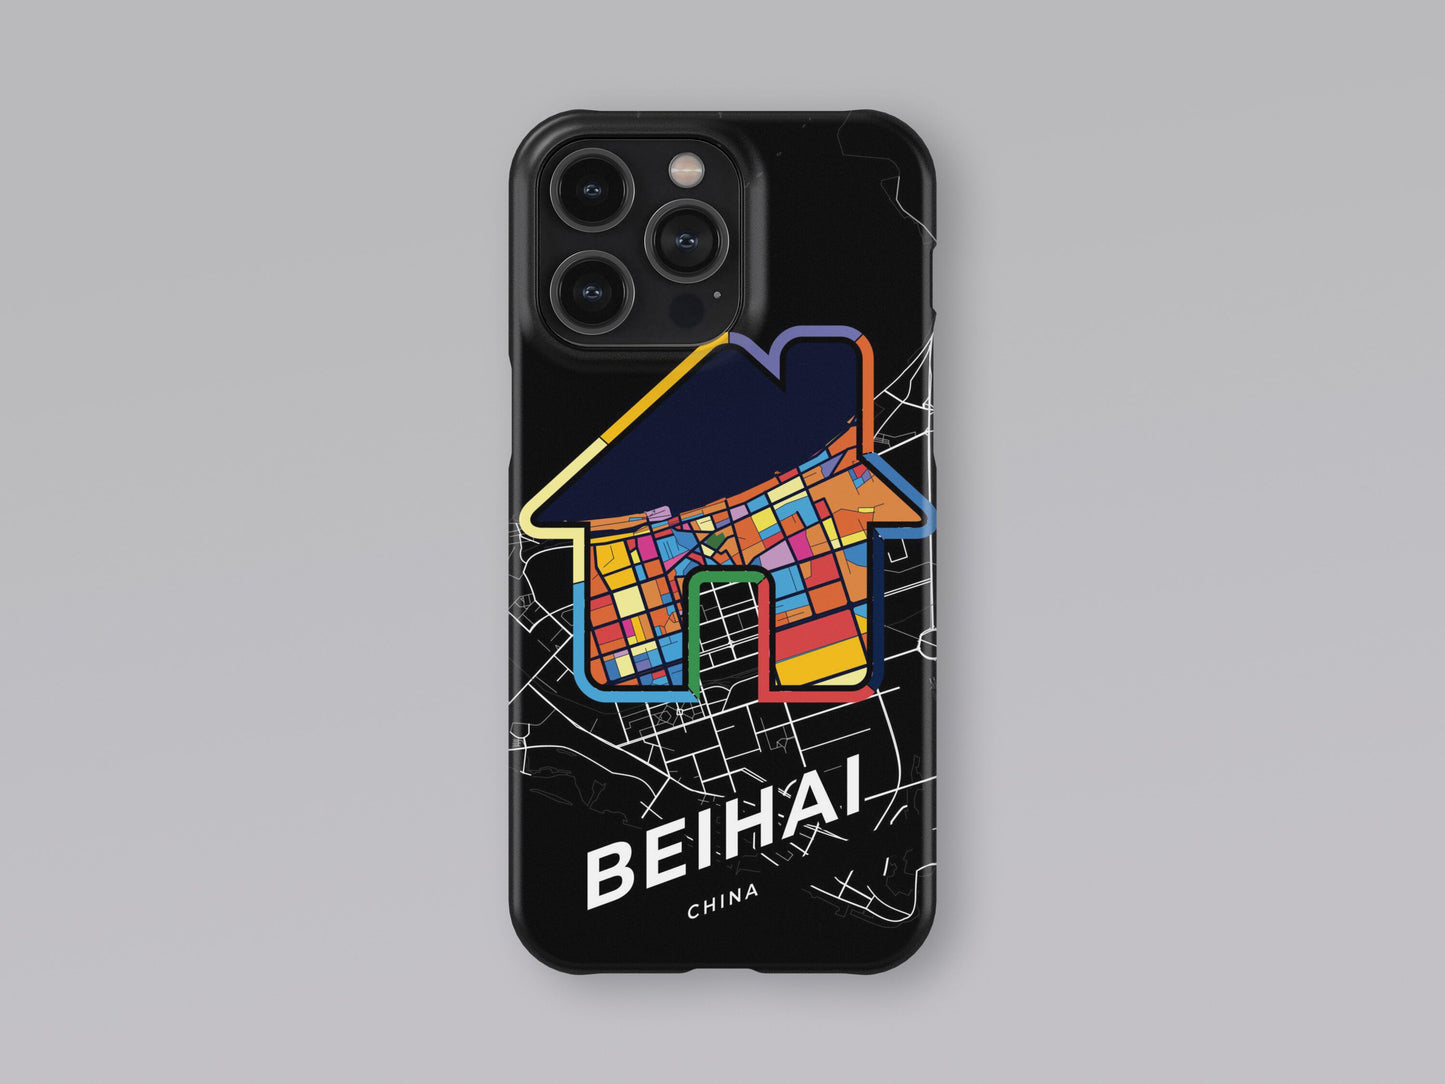 Beihai China slim phone case with colorful icon. Birthday, wedding or housewarming gift. Couple match cases. 3